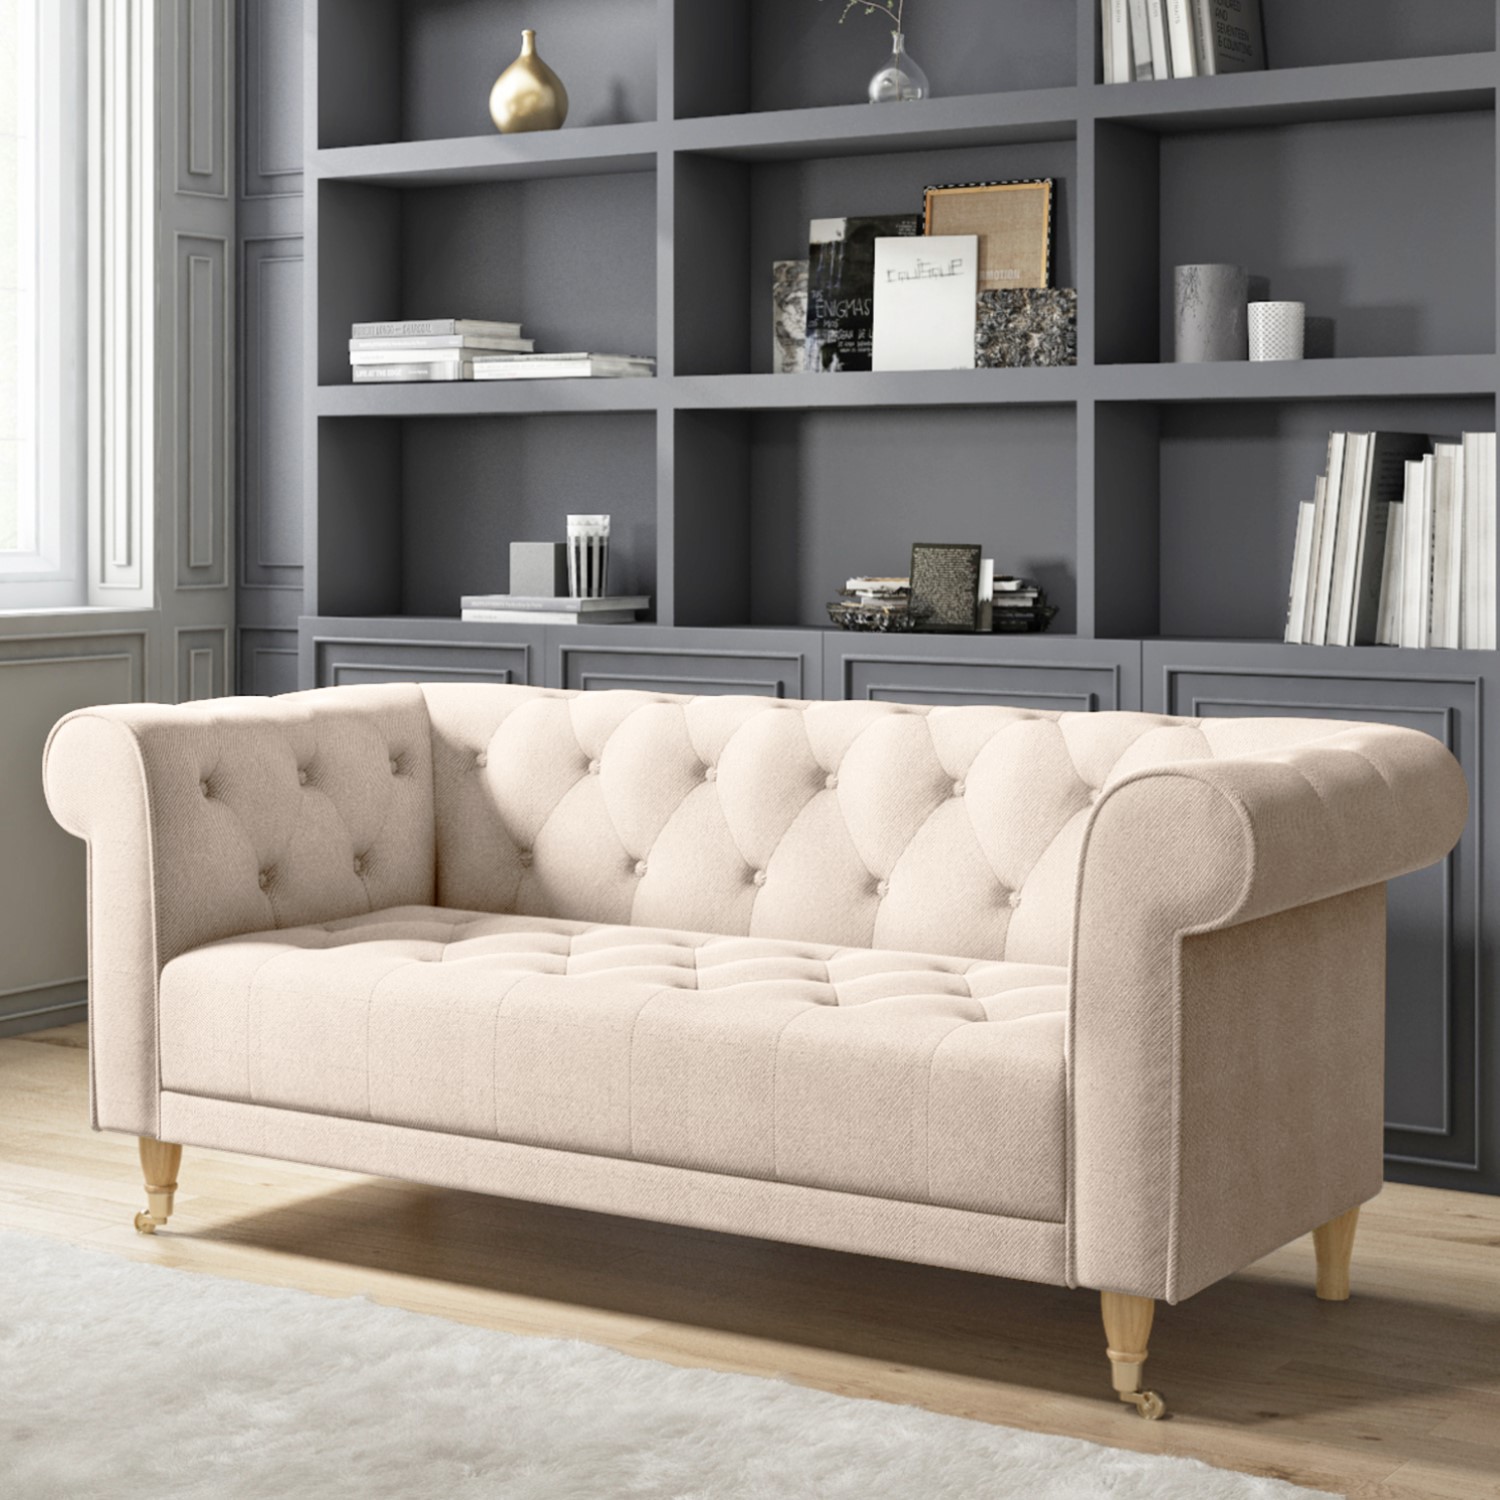 Read more about Beige woven 3 seater chesterfield sofa ophelia